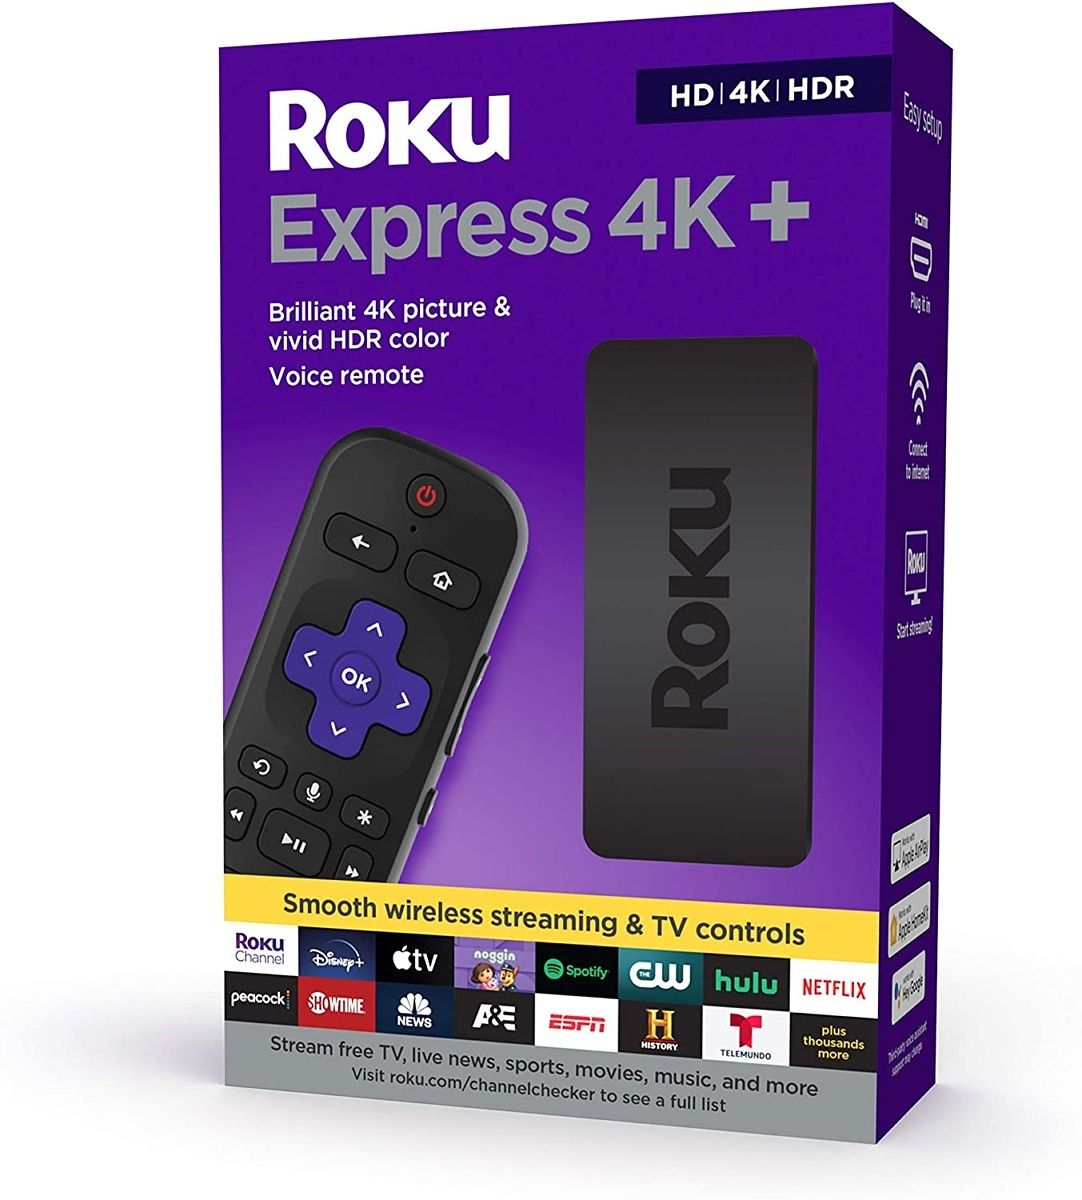 This is Roku's latest (and cheapest) 4K streaming box. It's on sale for $29 at Amazon and $30 at Best Buy, $9 and $10 below the original price, respectively.